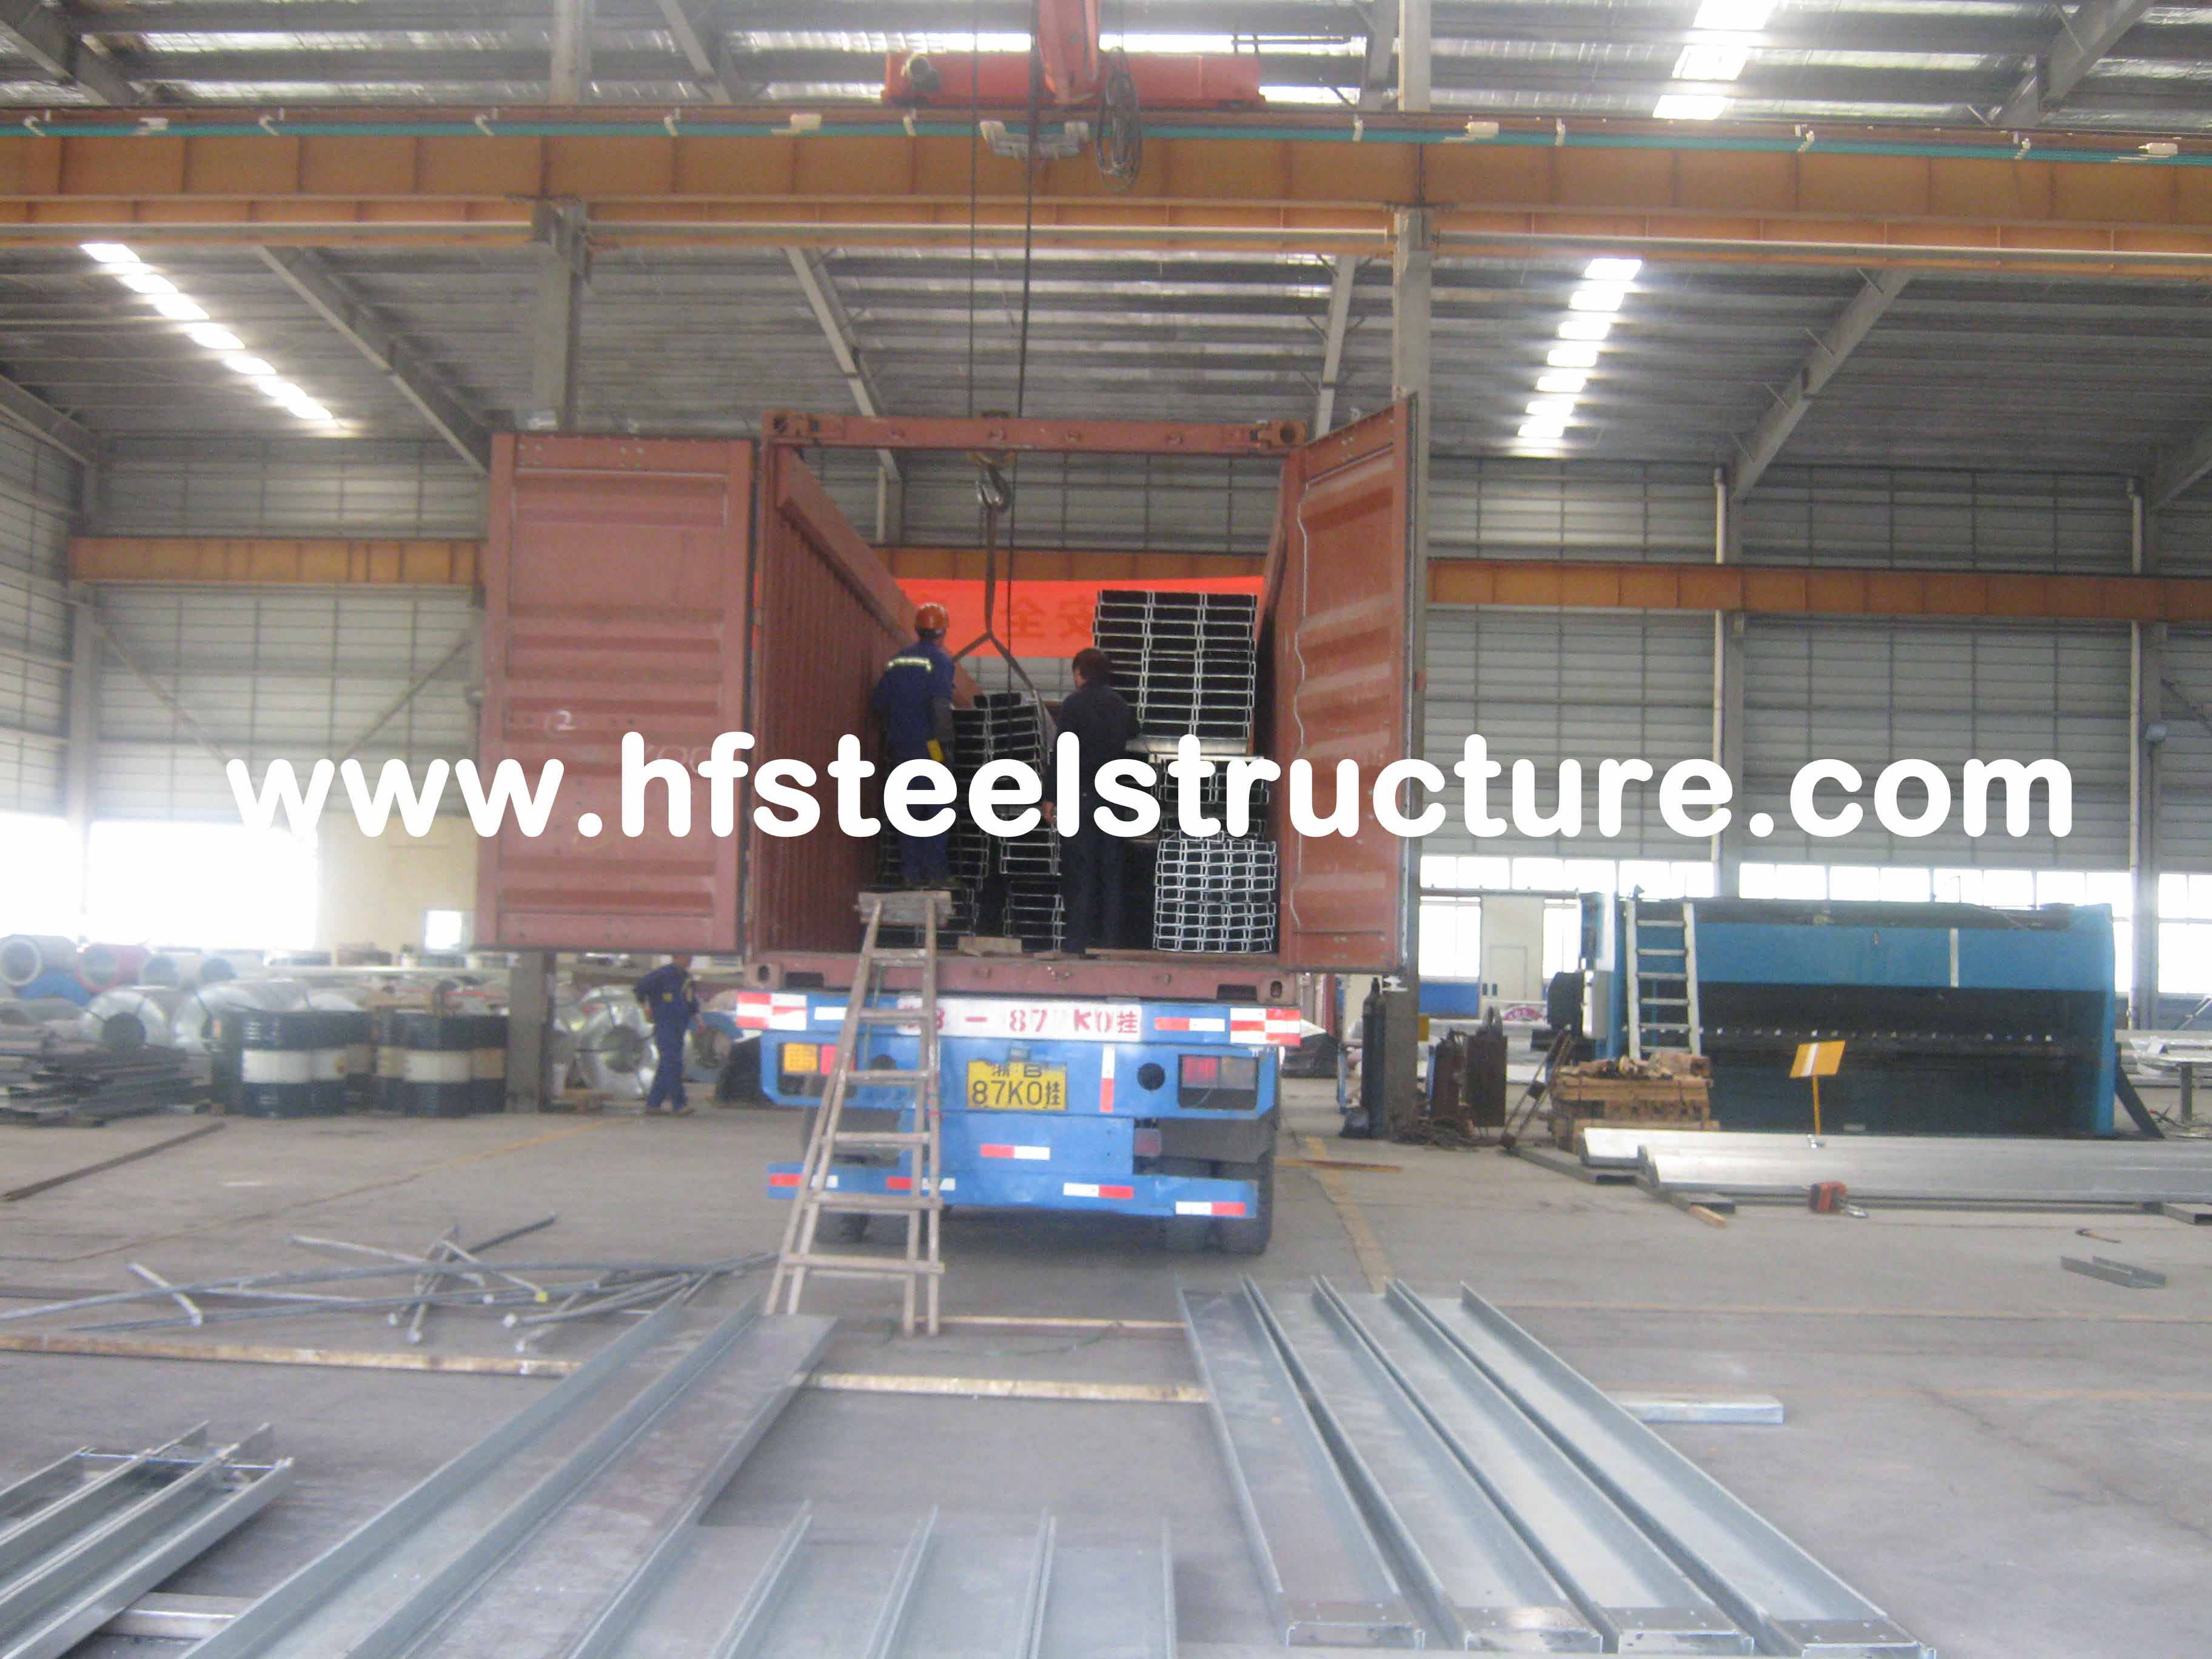 Hot Dipped Galvanised Steel Purlines By Galvanizing Steel Strip For Prefab House